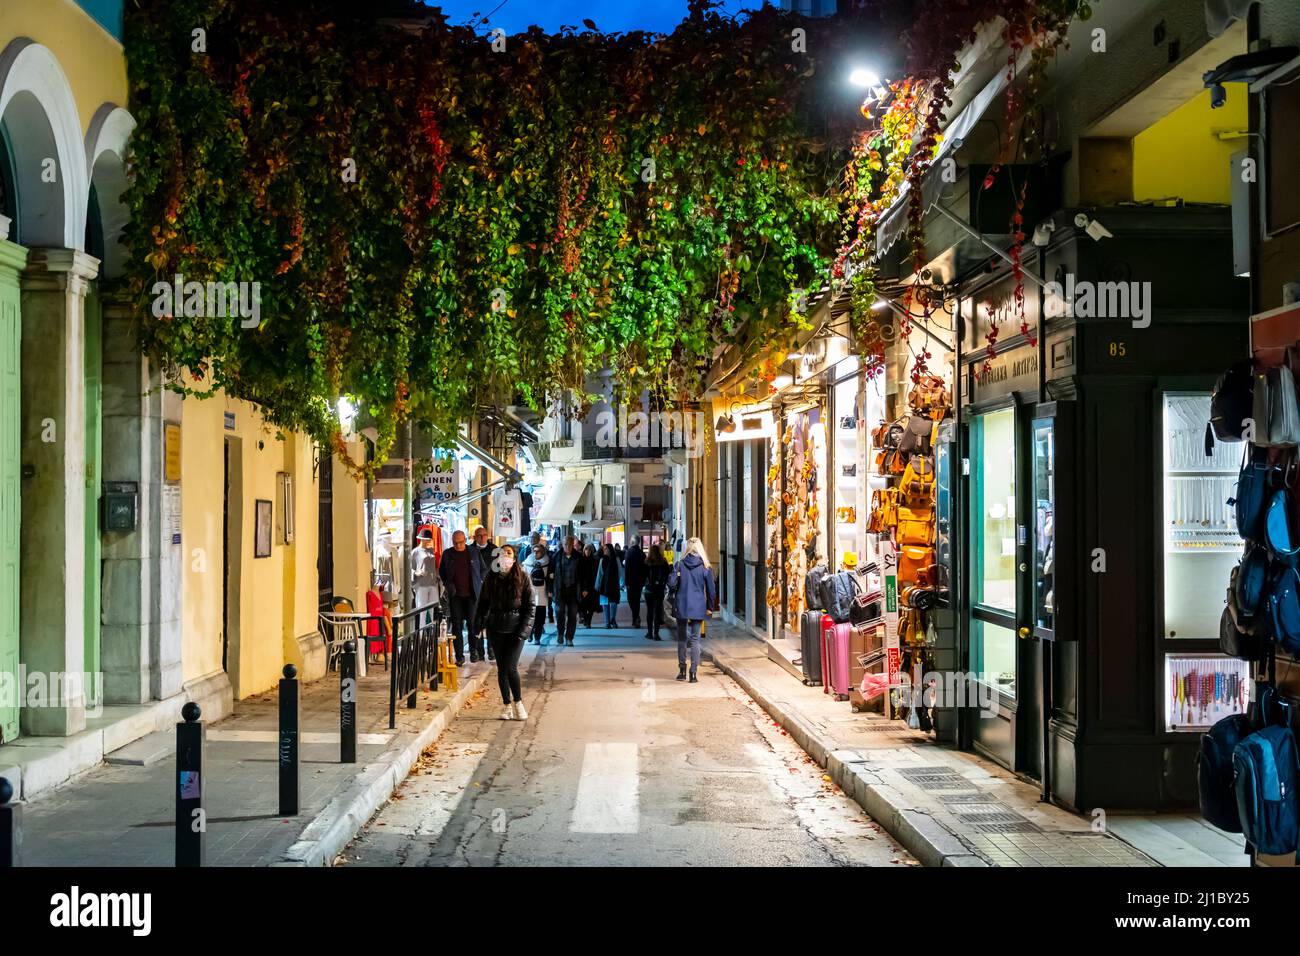 A picturesque street in the Plaka district of Athens Greece illuminated in the evening with plants and flowering trees covering the alley. Stock Photo